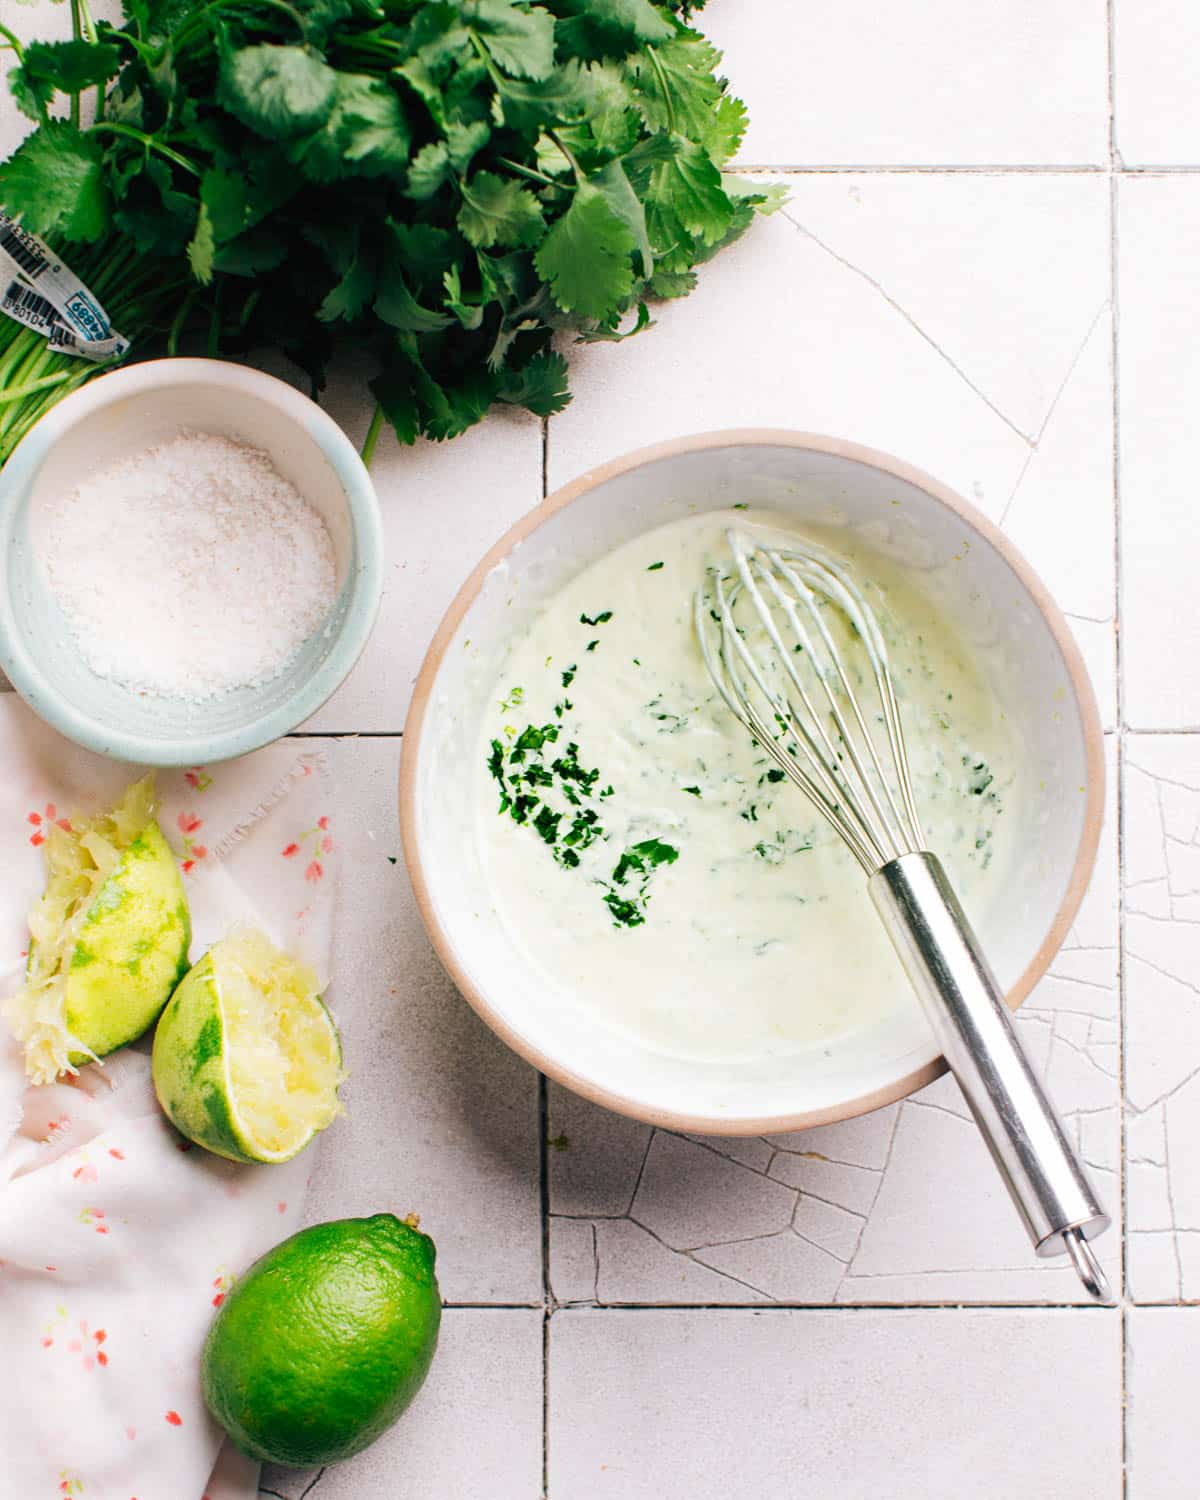 Freshly made cilantro lime crema in a small bowl with a whisk. Limes, kosher salt, and cilantro are placed nearby.